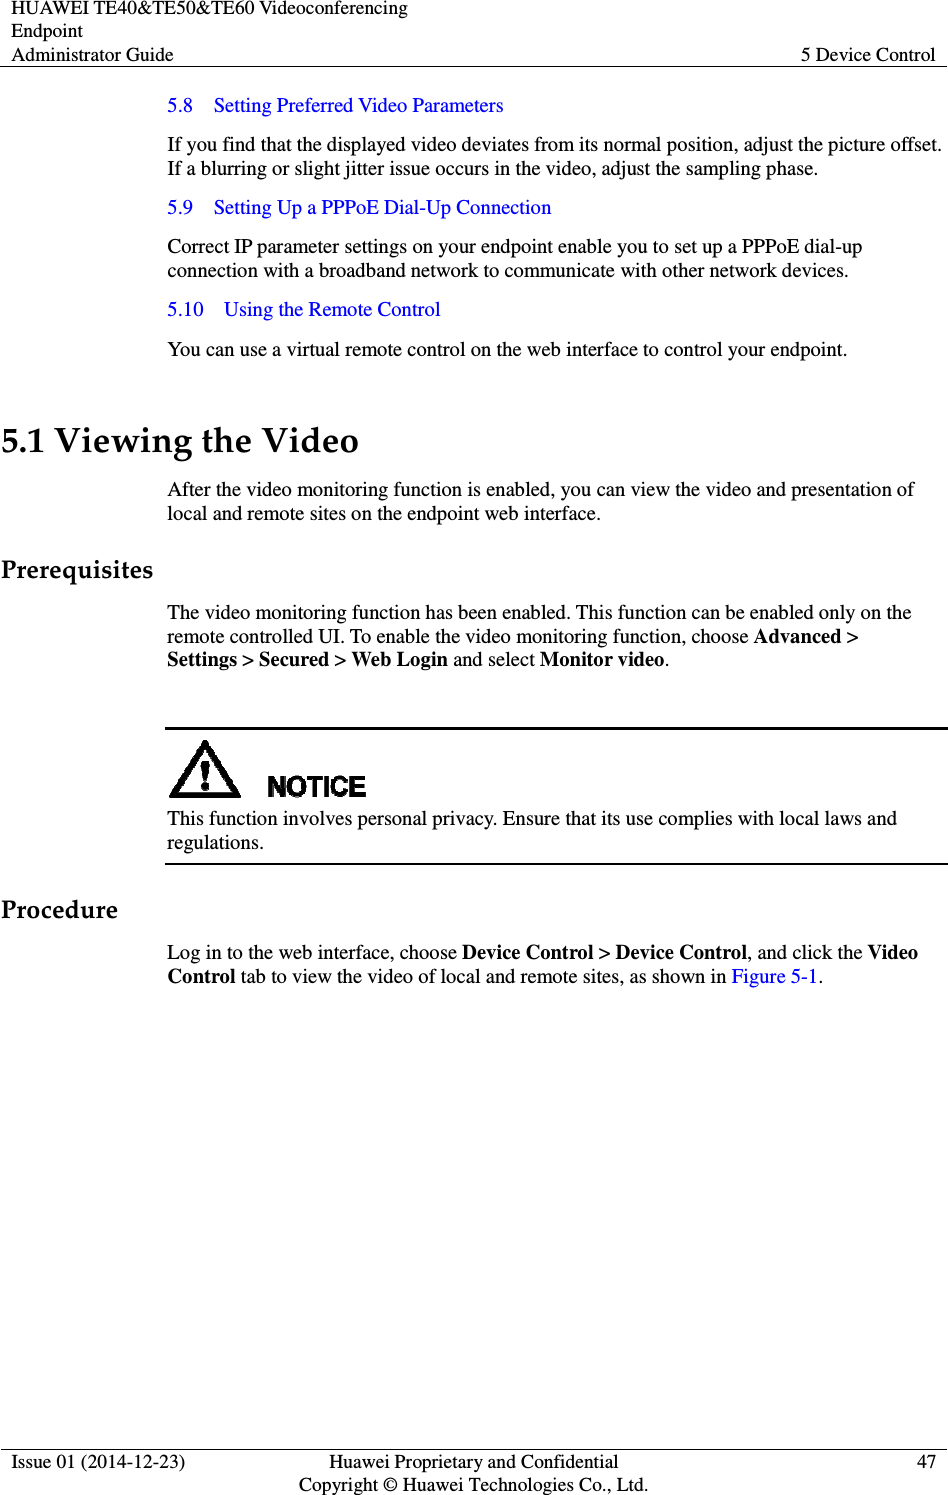 HUAWEI TE40&amp;TE50&amp;TE60 Videoconferencing Endpoint Administrator Guide  5 Device Control  Issue 01 (2014-12-23)  Huawei Proprietary and Confidential                                     Copyright © Huawei Technologies Co., Ltd. 47  5.8    Setting Preferred Video Parameters If you find that the displayed video deviates from its normal position, adjust the picture offset. If a blurring or slight jitter issue occurs in the video, adjust the sampling phase. 5.9    Setting Up a PPPoE Dial-Up Connection Correct IP parameter settings on your endpoint enable you to set up a PPPoE dial-up connection with a broadband network to communicate with other network devices. 5.10    Using the Remote Control You can use a virtual remote control on the web interface to control your endpoint. 5.1 Viewing the Video After the video monitoring function is enabled, you can view the video and presentation of local and remote sites on the endpoint web interface. Prerequisites The video monitoring function has been enabled. This function can be enabled only on the remote controlled UI. To enable the video monitoring function, choose Advanced &gt; Settings &gt; Secured &gt; Web Login and select Monitor video.   This function involves personal privacy. Ensure that its use complies with local laws and regulations.   Procedure Log in to the web interface, choose Device Control &gt; Device Control, and click the Video Control tab to view the video of local and remote sites, as shown in Figure 5-1. 